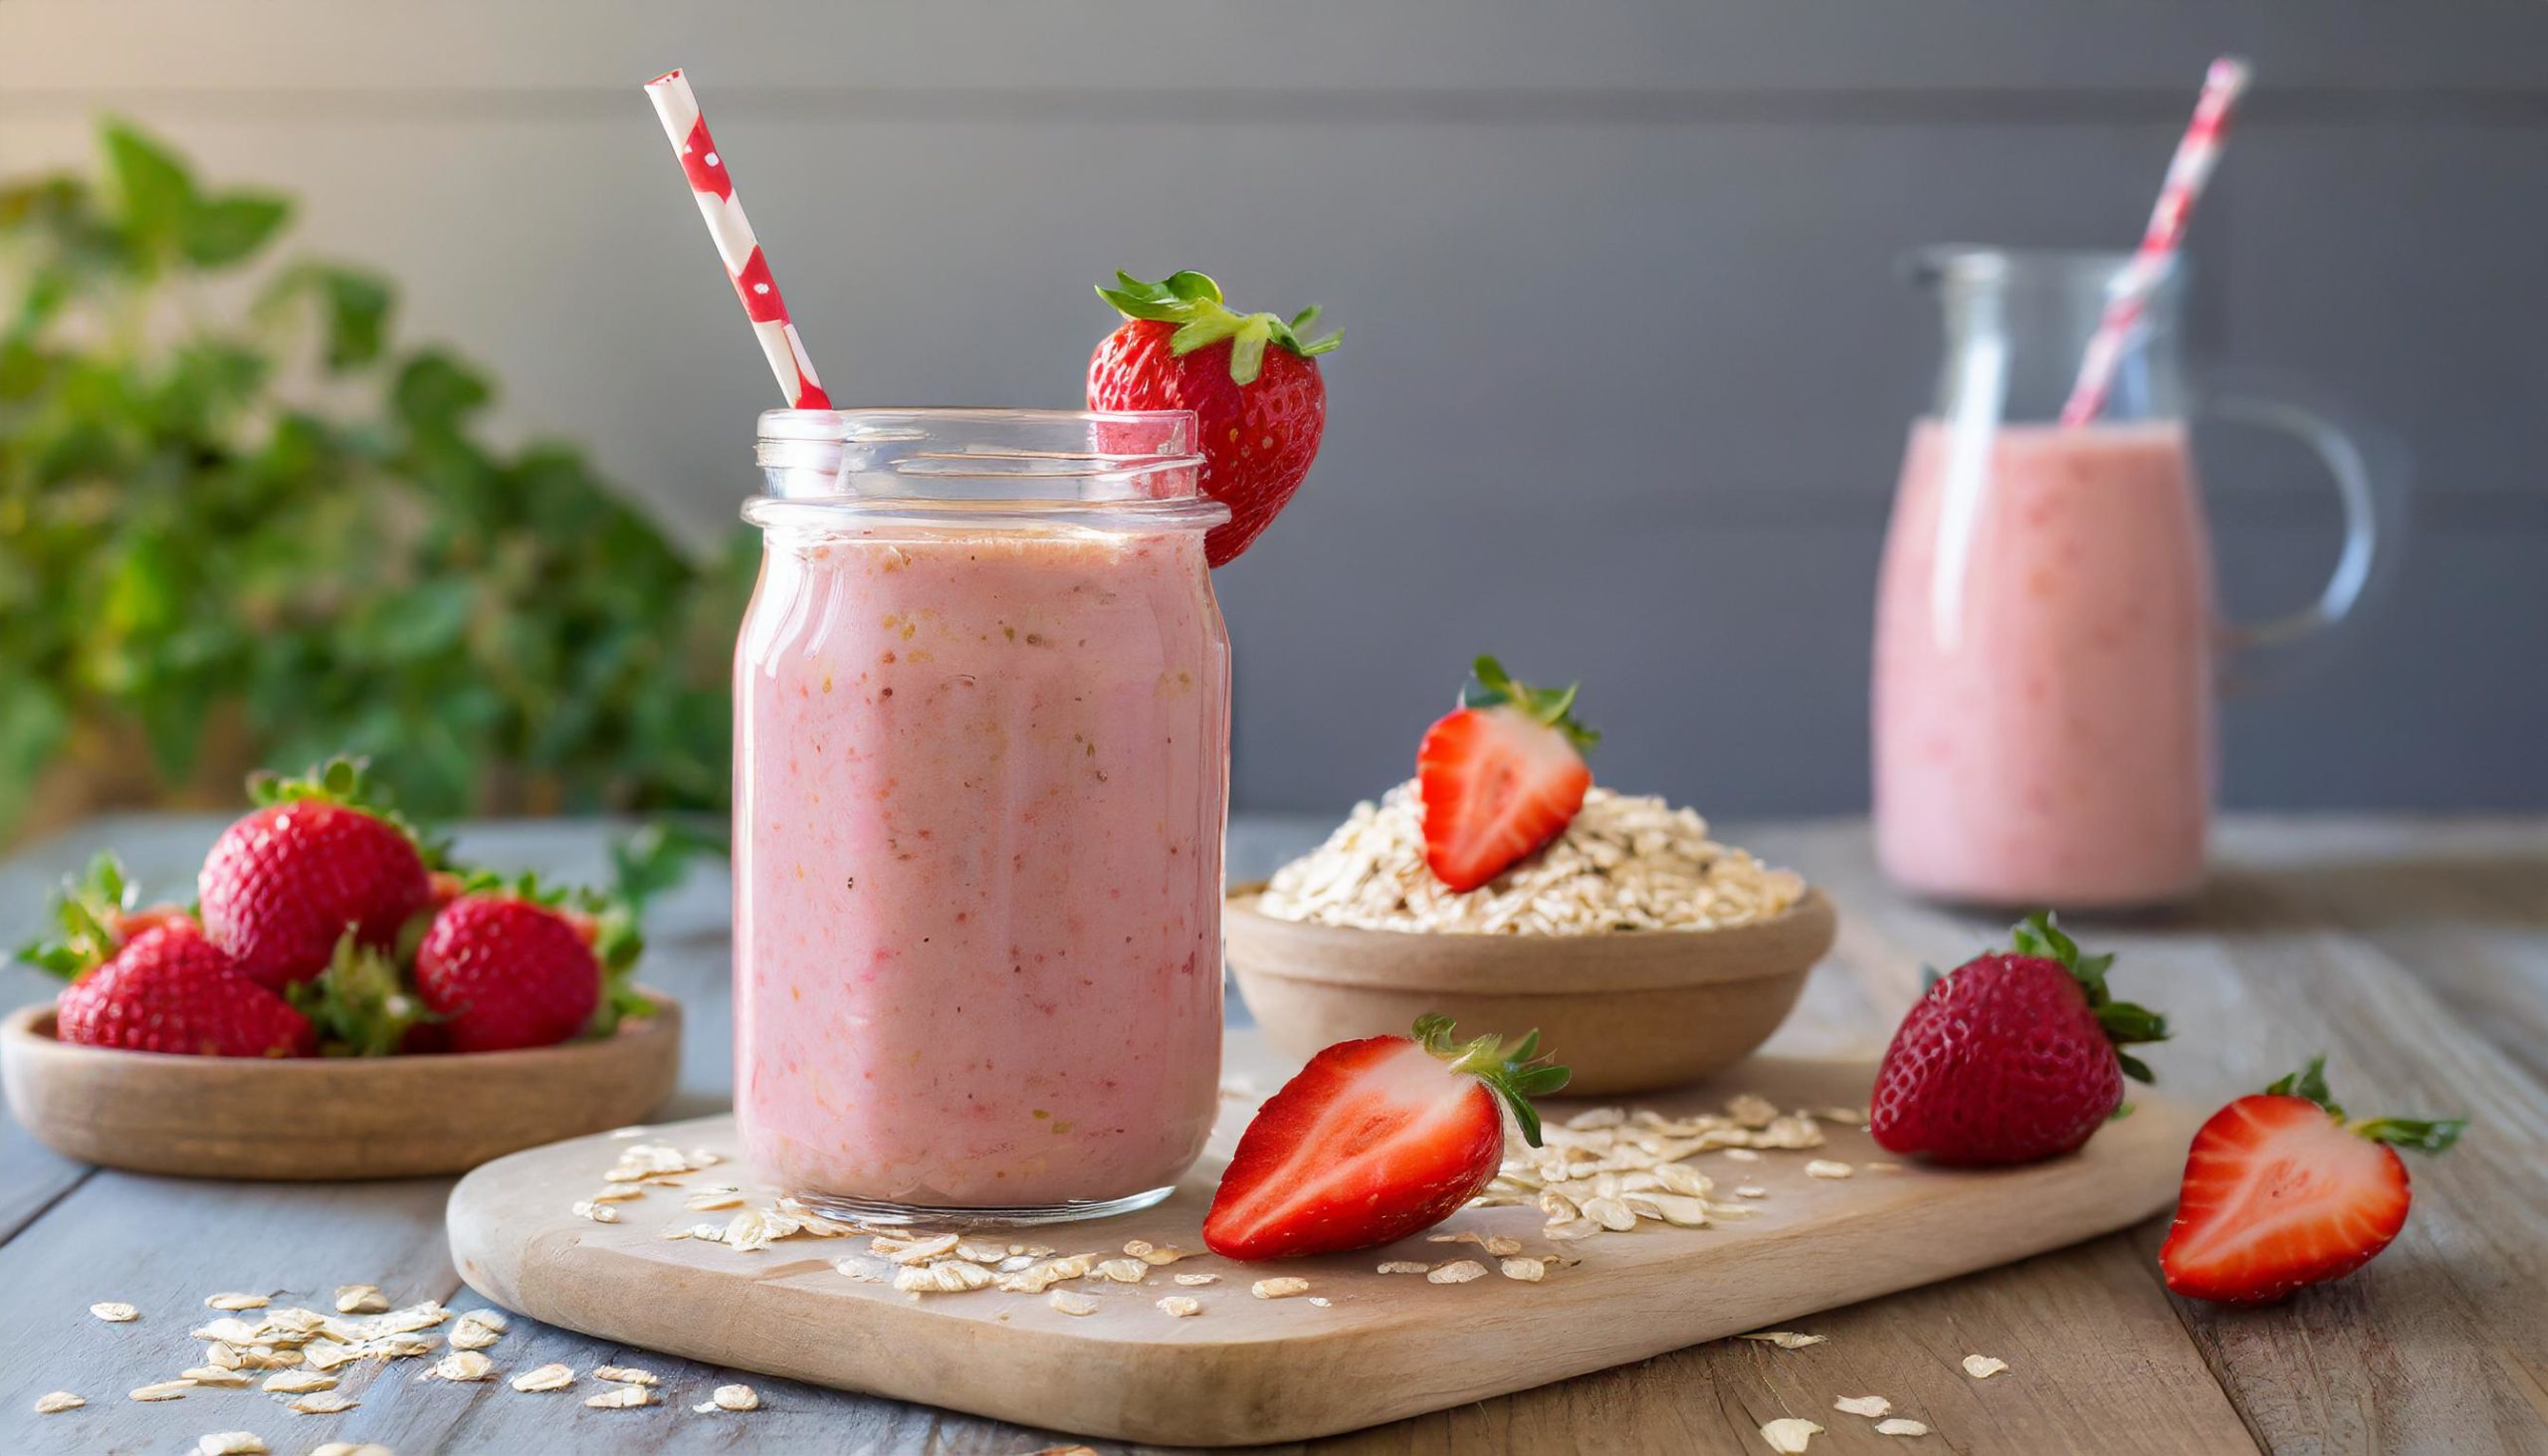 Strawberry oatmeal breakfast smoothie